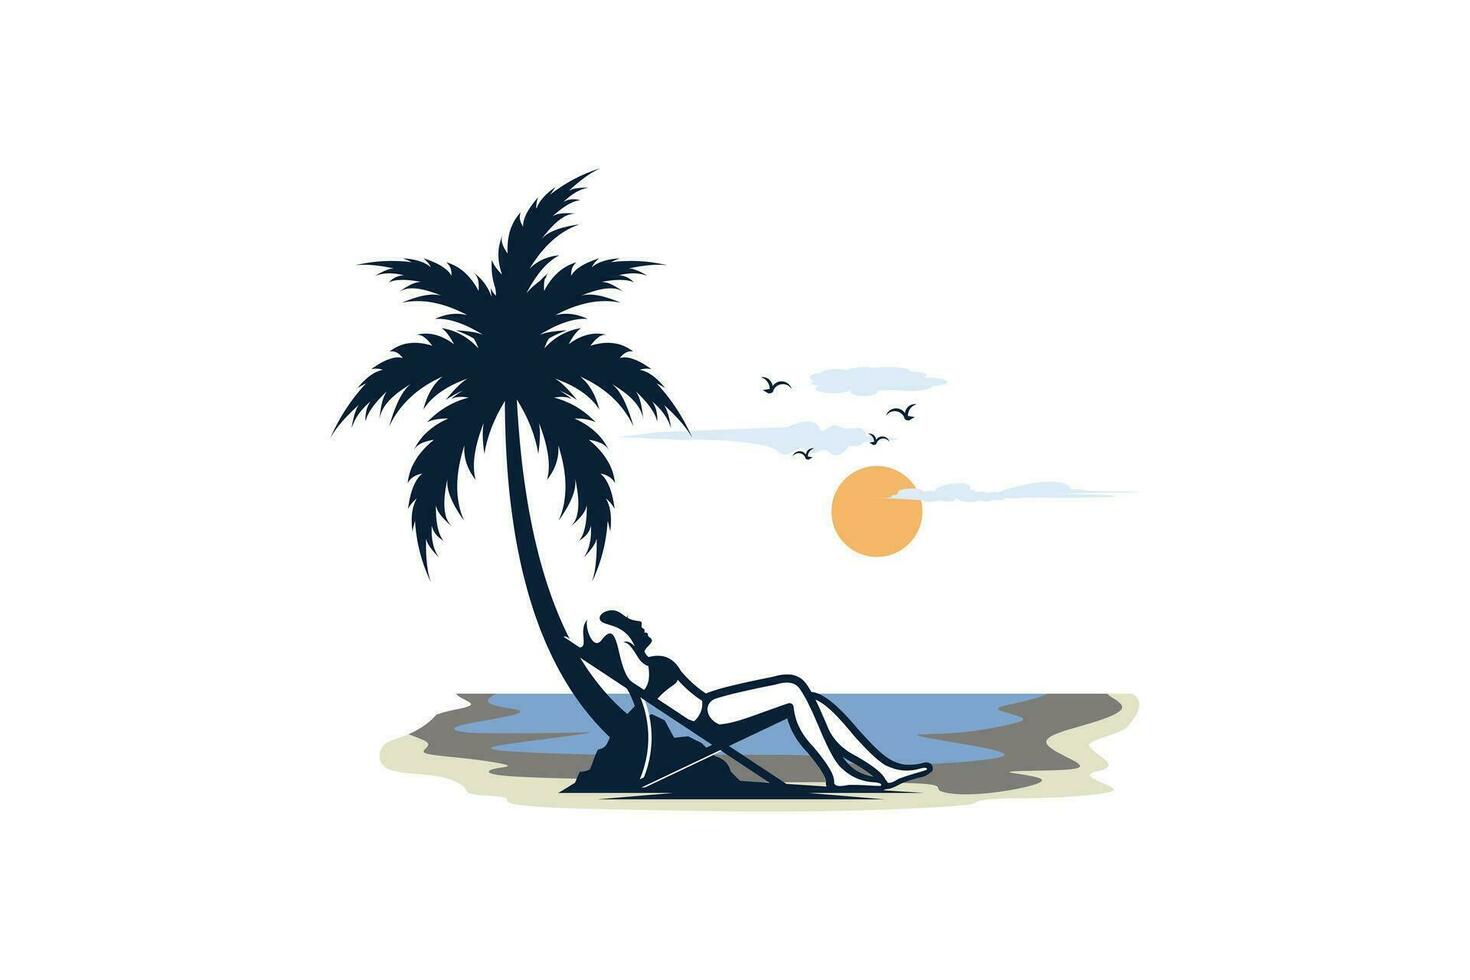 Sunbathing woman logo design sitting on lounge chair with beach background vector